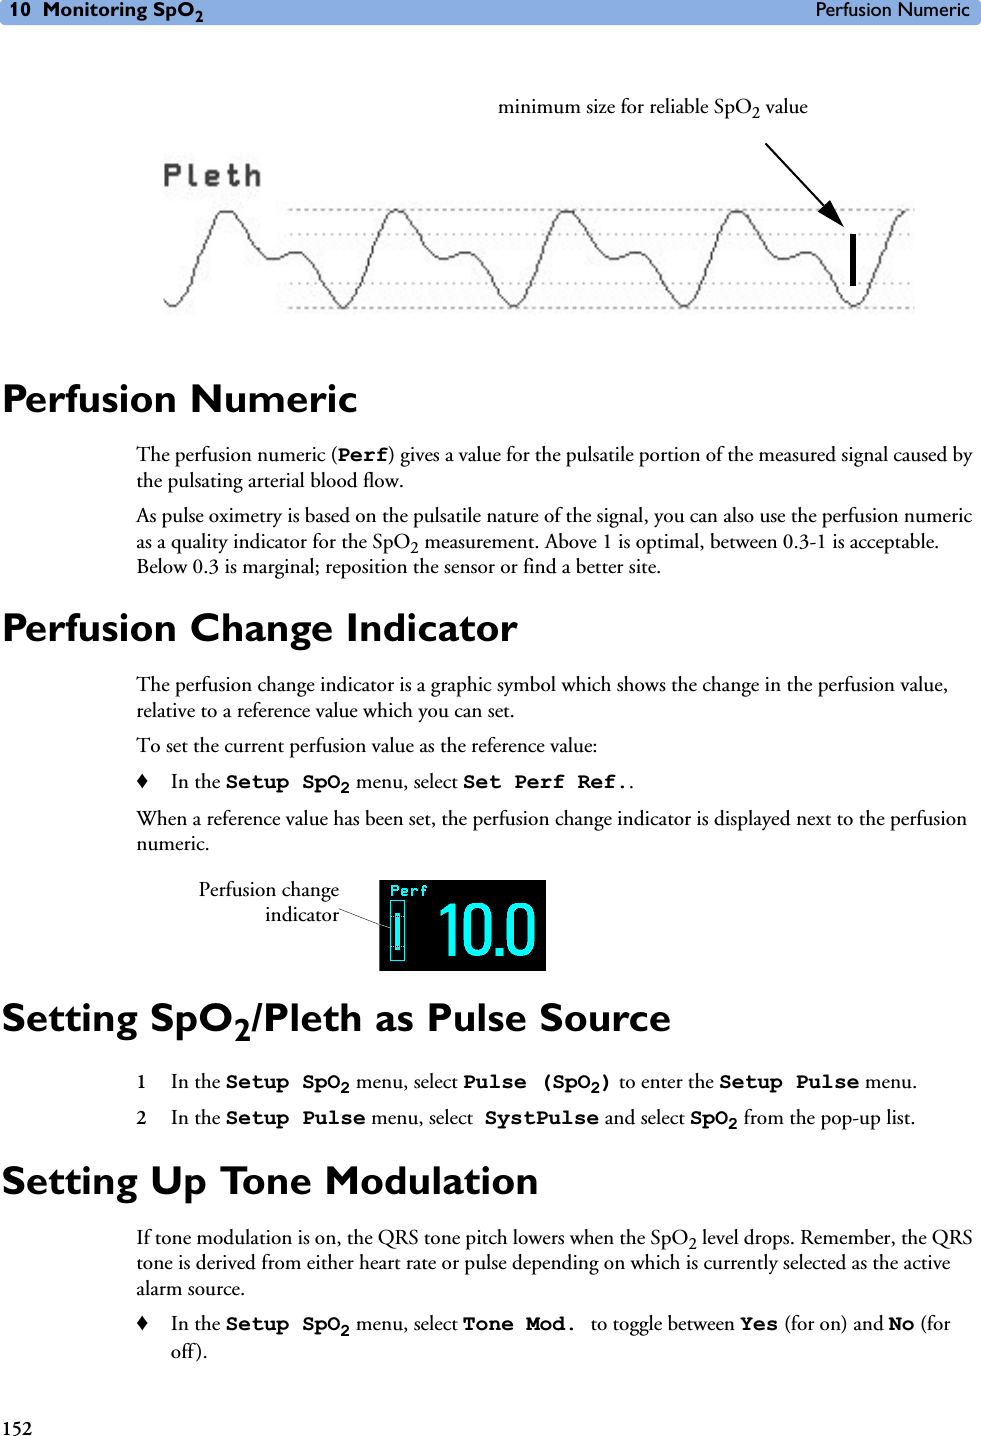 10 Monitoring SpO2Perfusion Numeric152 Perfusion NumericThe perfusion numeric (Perf) gives a value for the pulsatile portion of the measured signal caused by the pulsating arterial blood flow.As pulse oximetry is based on the pulsatile nature of the signal, you can also use the perfusion numeric as a quality indicator for the SpO2 measurement. Above 1 is optimal, between 0.3-1 is acceptable. Below 0.3 is marginal; reposition the sensor or find a better site.Perfusion Change IndicatorThe perfusion change indicator is a graphic symbol which shows the change in the perfusion value, relative to a reference value which you can set. To set the current perfusion value as the reference value:♦In the Setup SpO2 menu, select Set Perf Ref..When a reference value has been set, the perfusion change indicator is displayed next to the perfusion numeric.Setting SpO2/Pleth as Pulse Source1In the Setup SpO2 menu, select Pulse (SpO2) to enter the Setup Pulse menu.2In the Setup Pulse menu, select SystPulse and select SpO2 from the pop-up list.Setting Up Tone ModulationIf tone modulation is on, the QRS tone pitch lowers when the SpO2 level drops. Remember, the QRS tone is derived from either heart rate or pulse depending on which is currently selected as the active alarm source. ♦In the Setup SpO2 menu, select Tone Mod. to toggle between Yes (for on) and No (for off).minimum size for reliable SpO2 valuePerfusion changeindicator